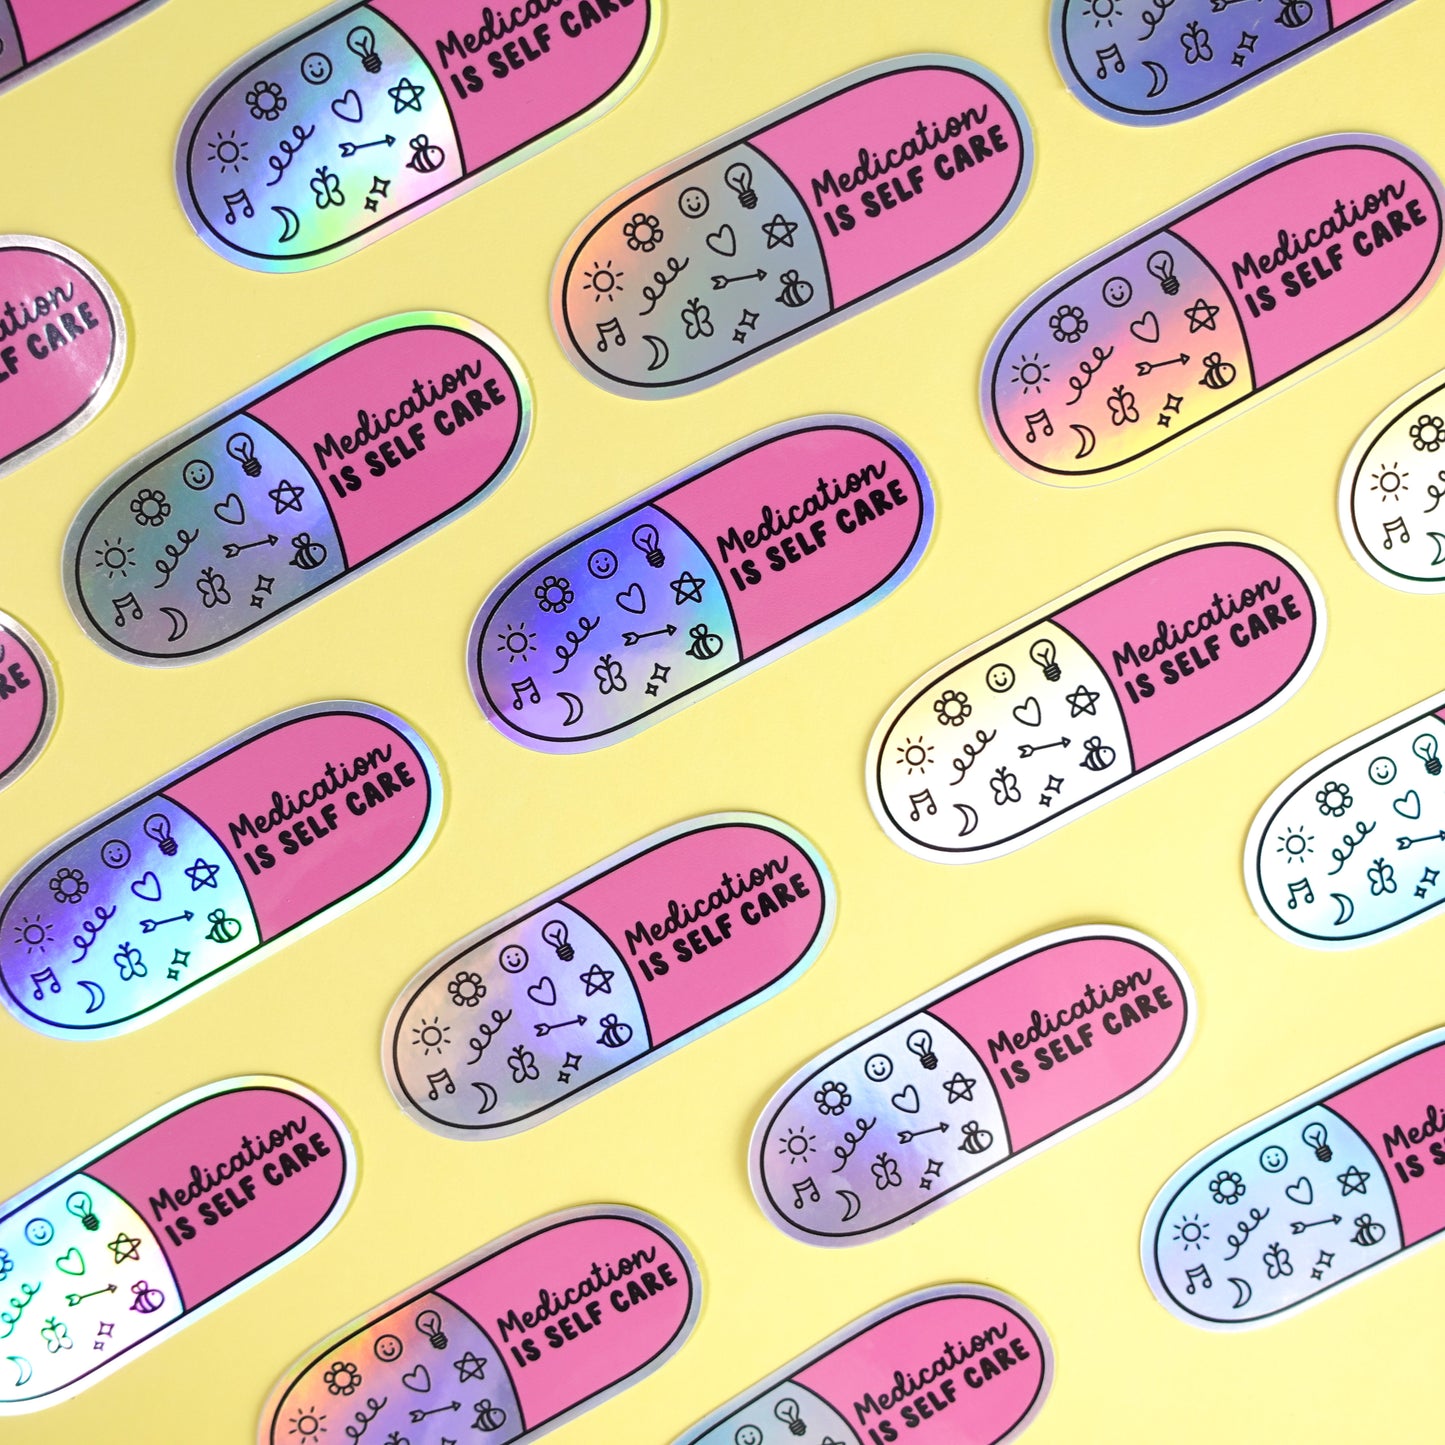 Medication is Self-Care Holographic Sticker